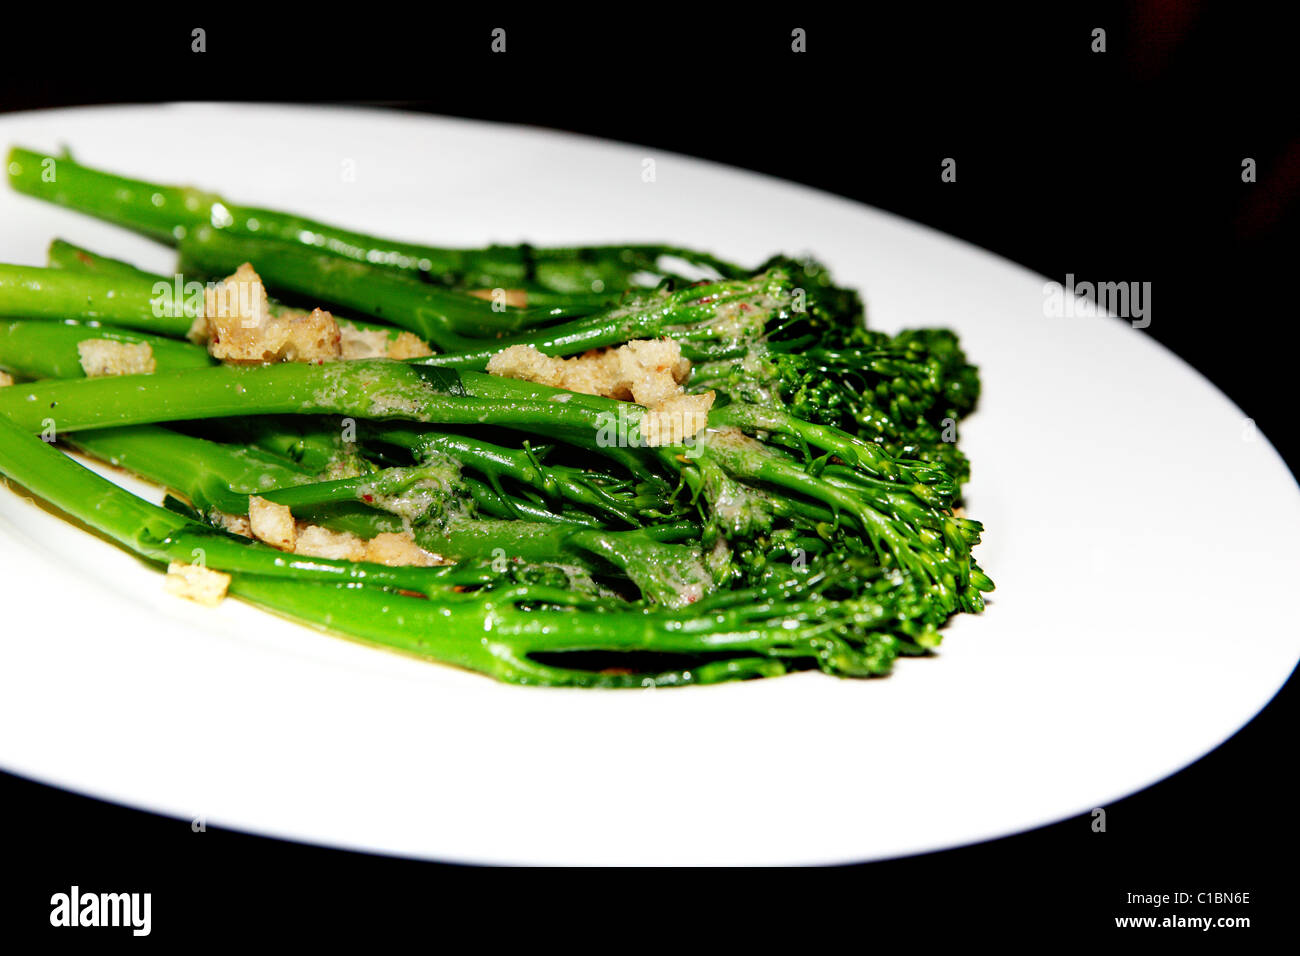 GOURMET FOOD MEAL VEGETARIAN VEGGIE PLATE COOKED CUISINE CULINARY ASPARAGUS STEAMED Stock Photo